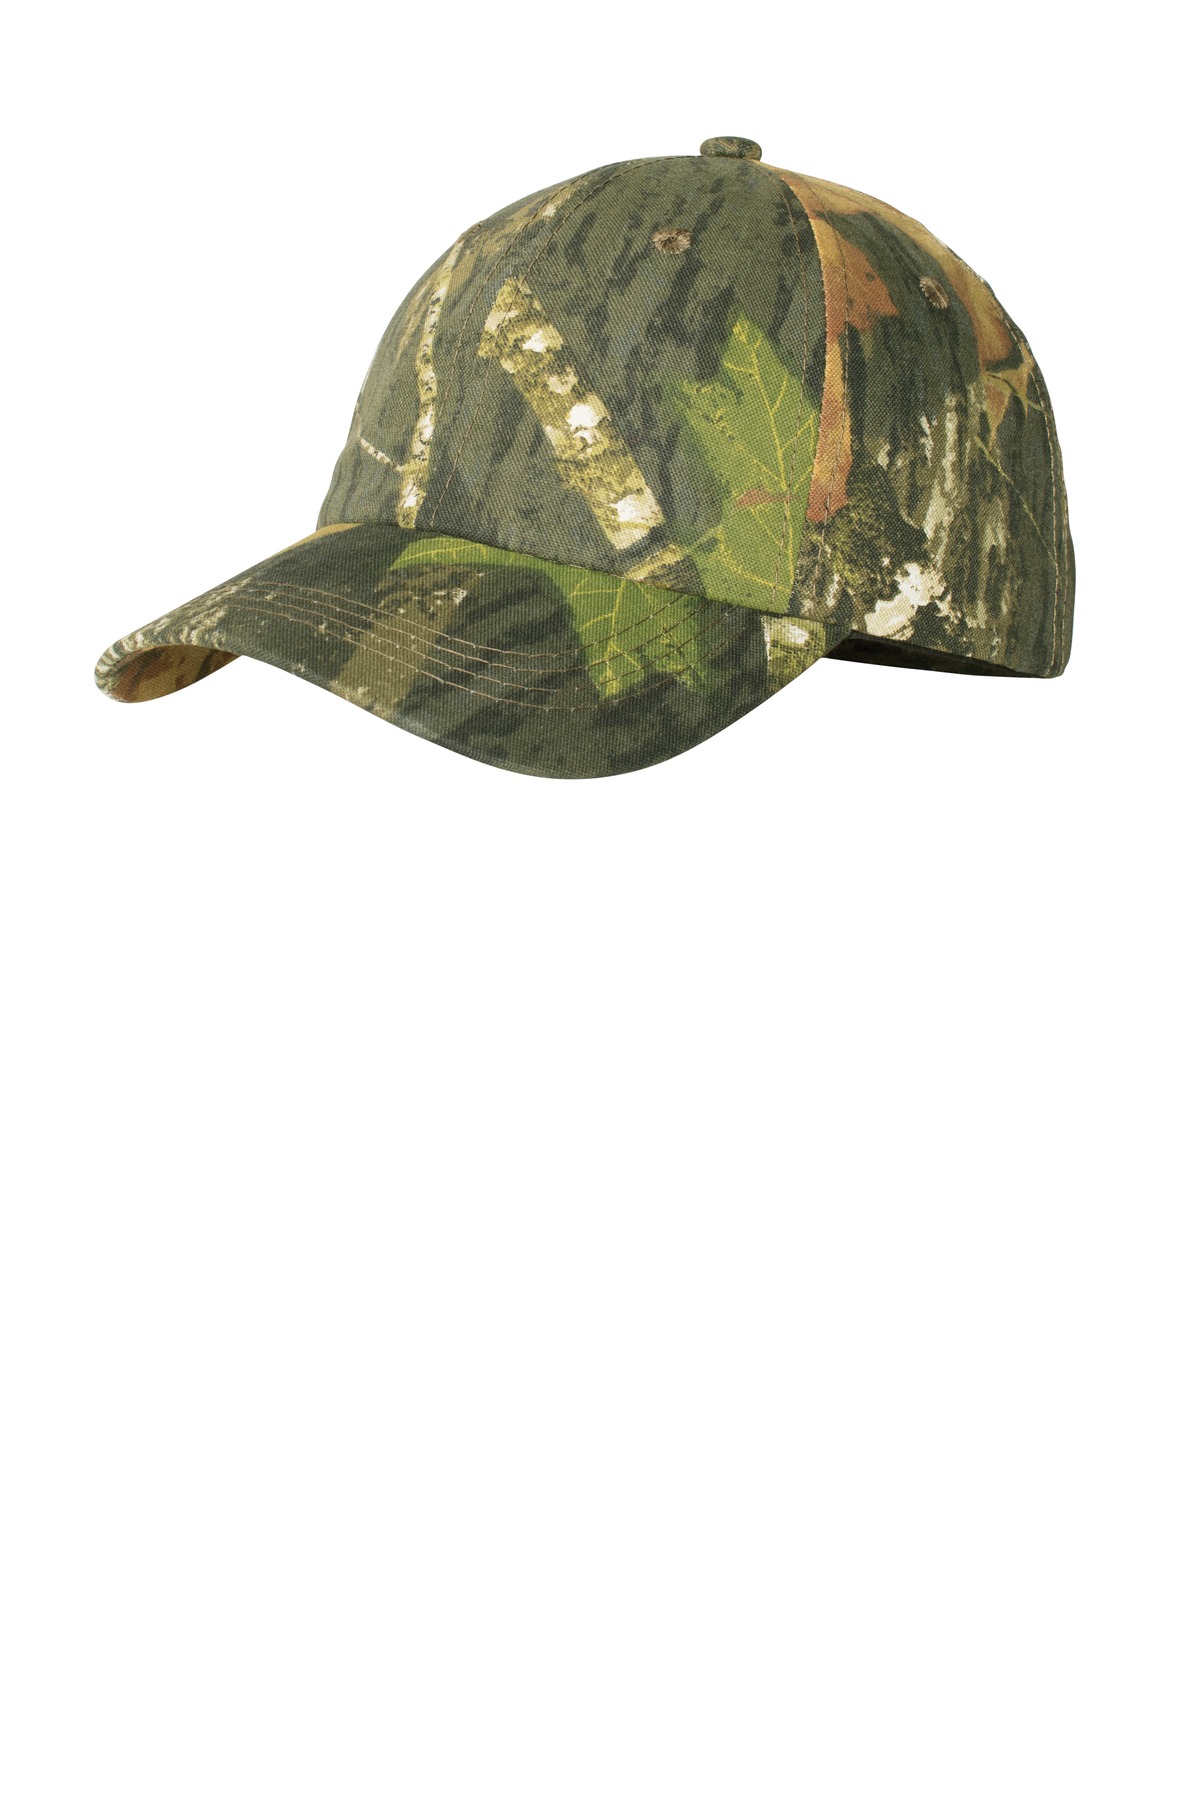 Port Authority Pro Camouflage Series Garment-Washed Cap - C871